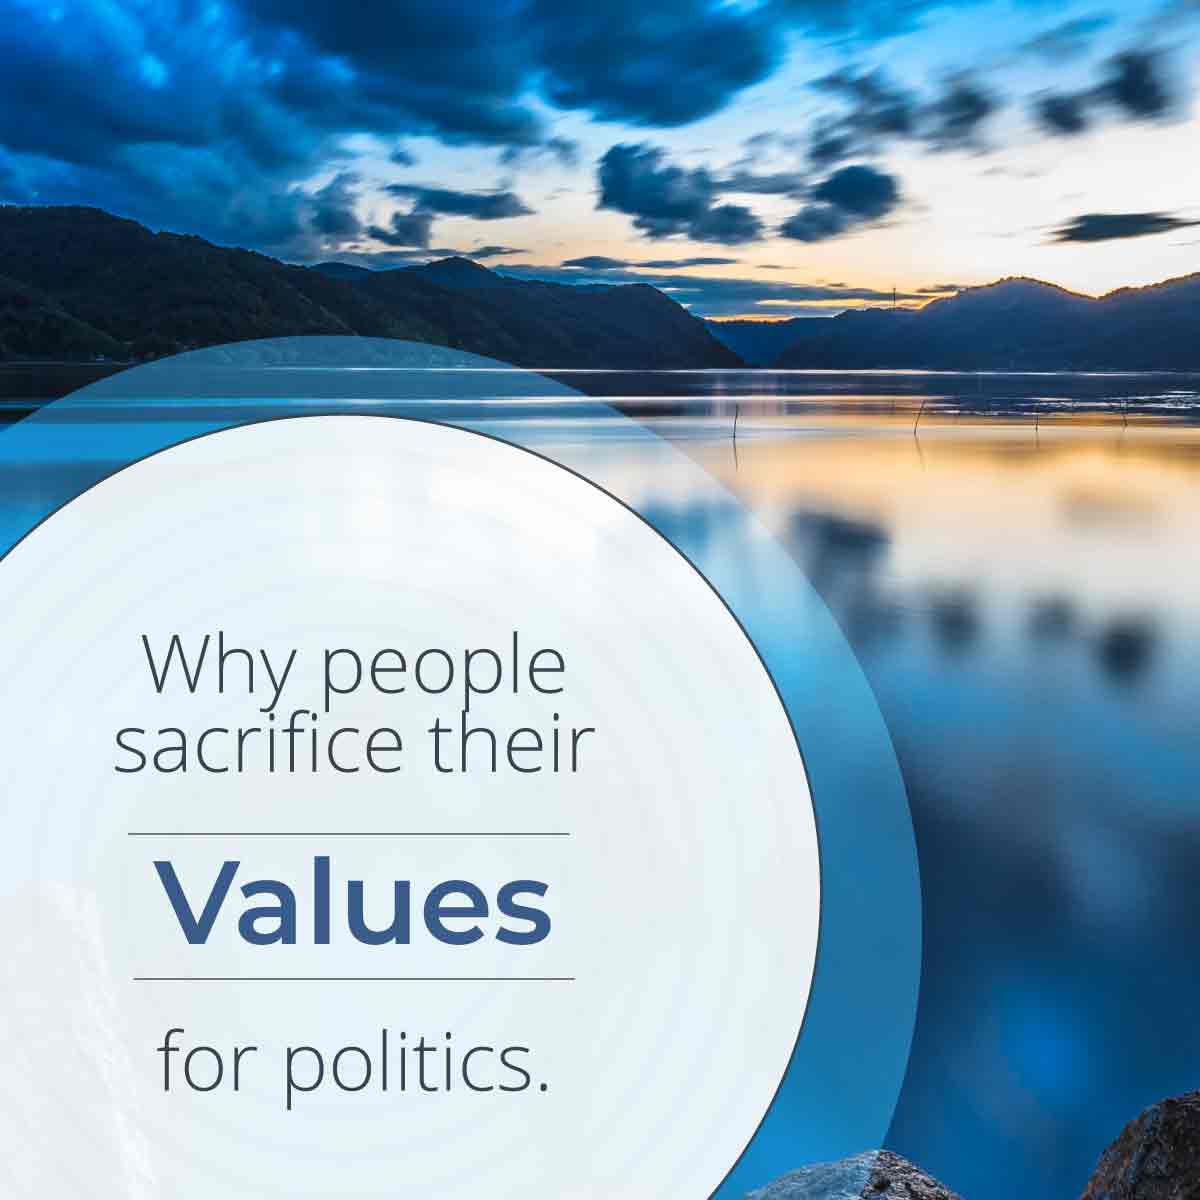 Why people sacrifice values for politics